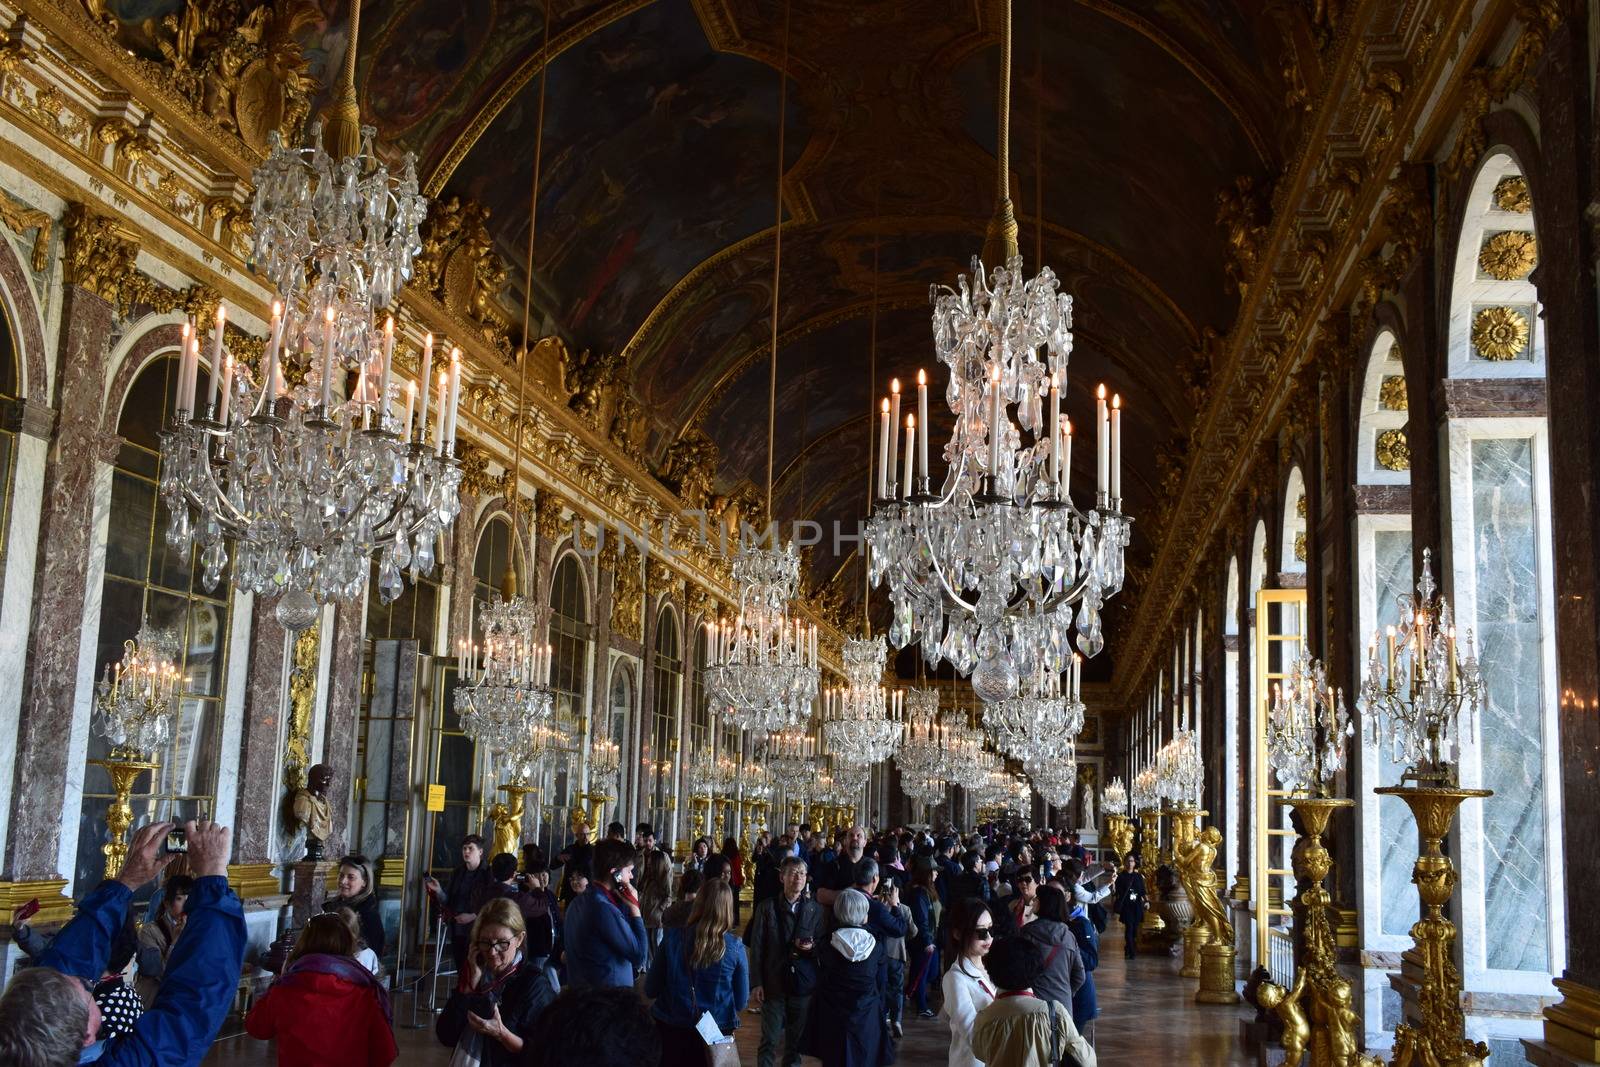 Versailles, France - May 02,2018: Hall of Mirrors of the famous Palace of Versailles in France